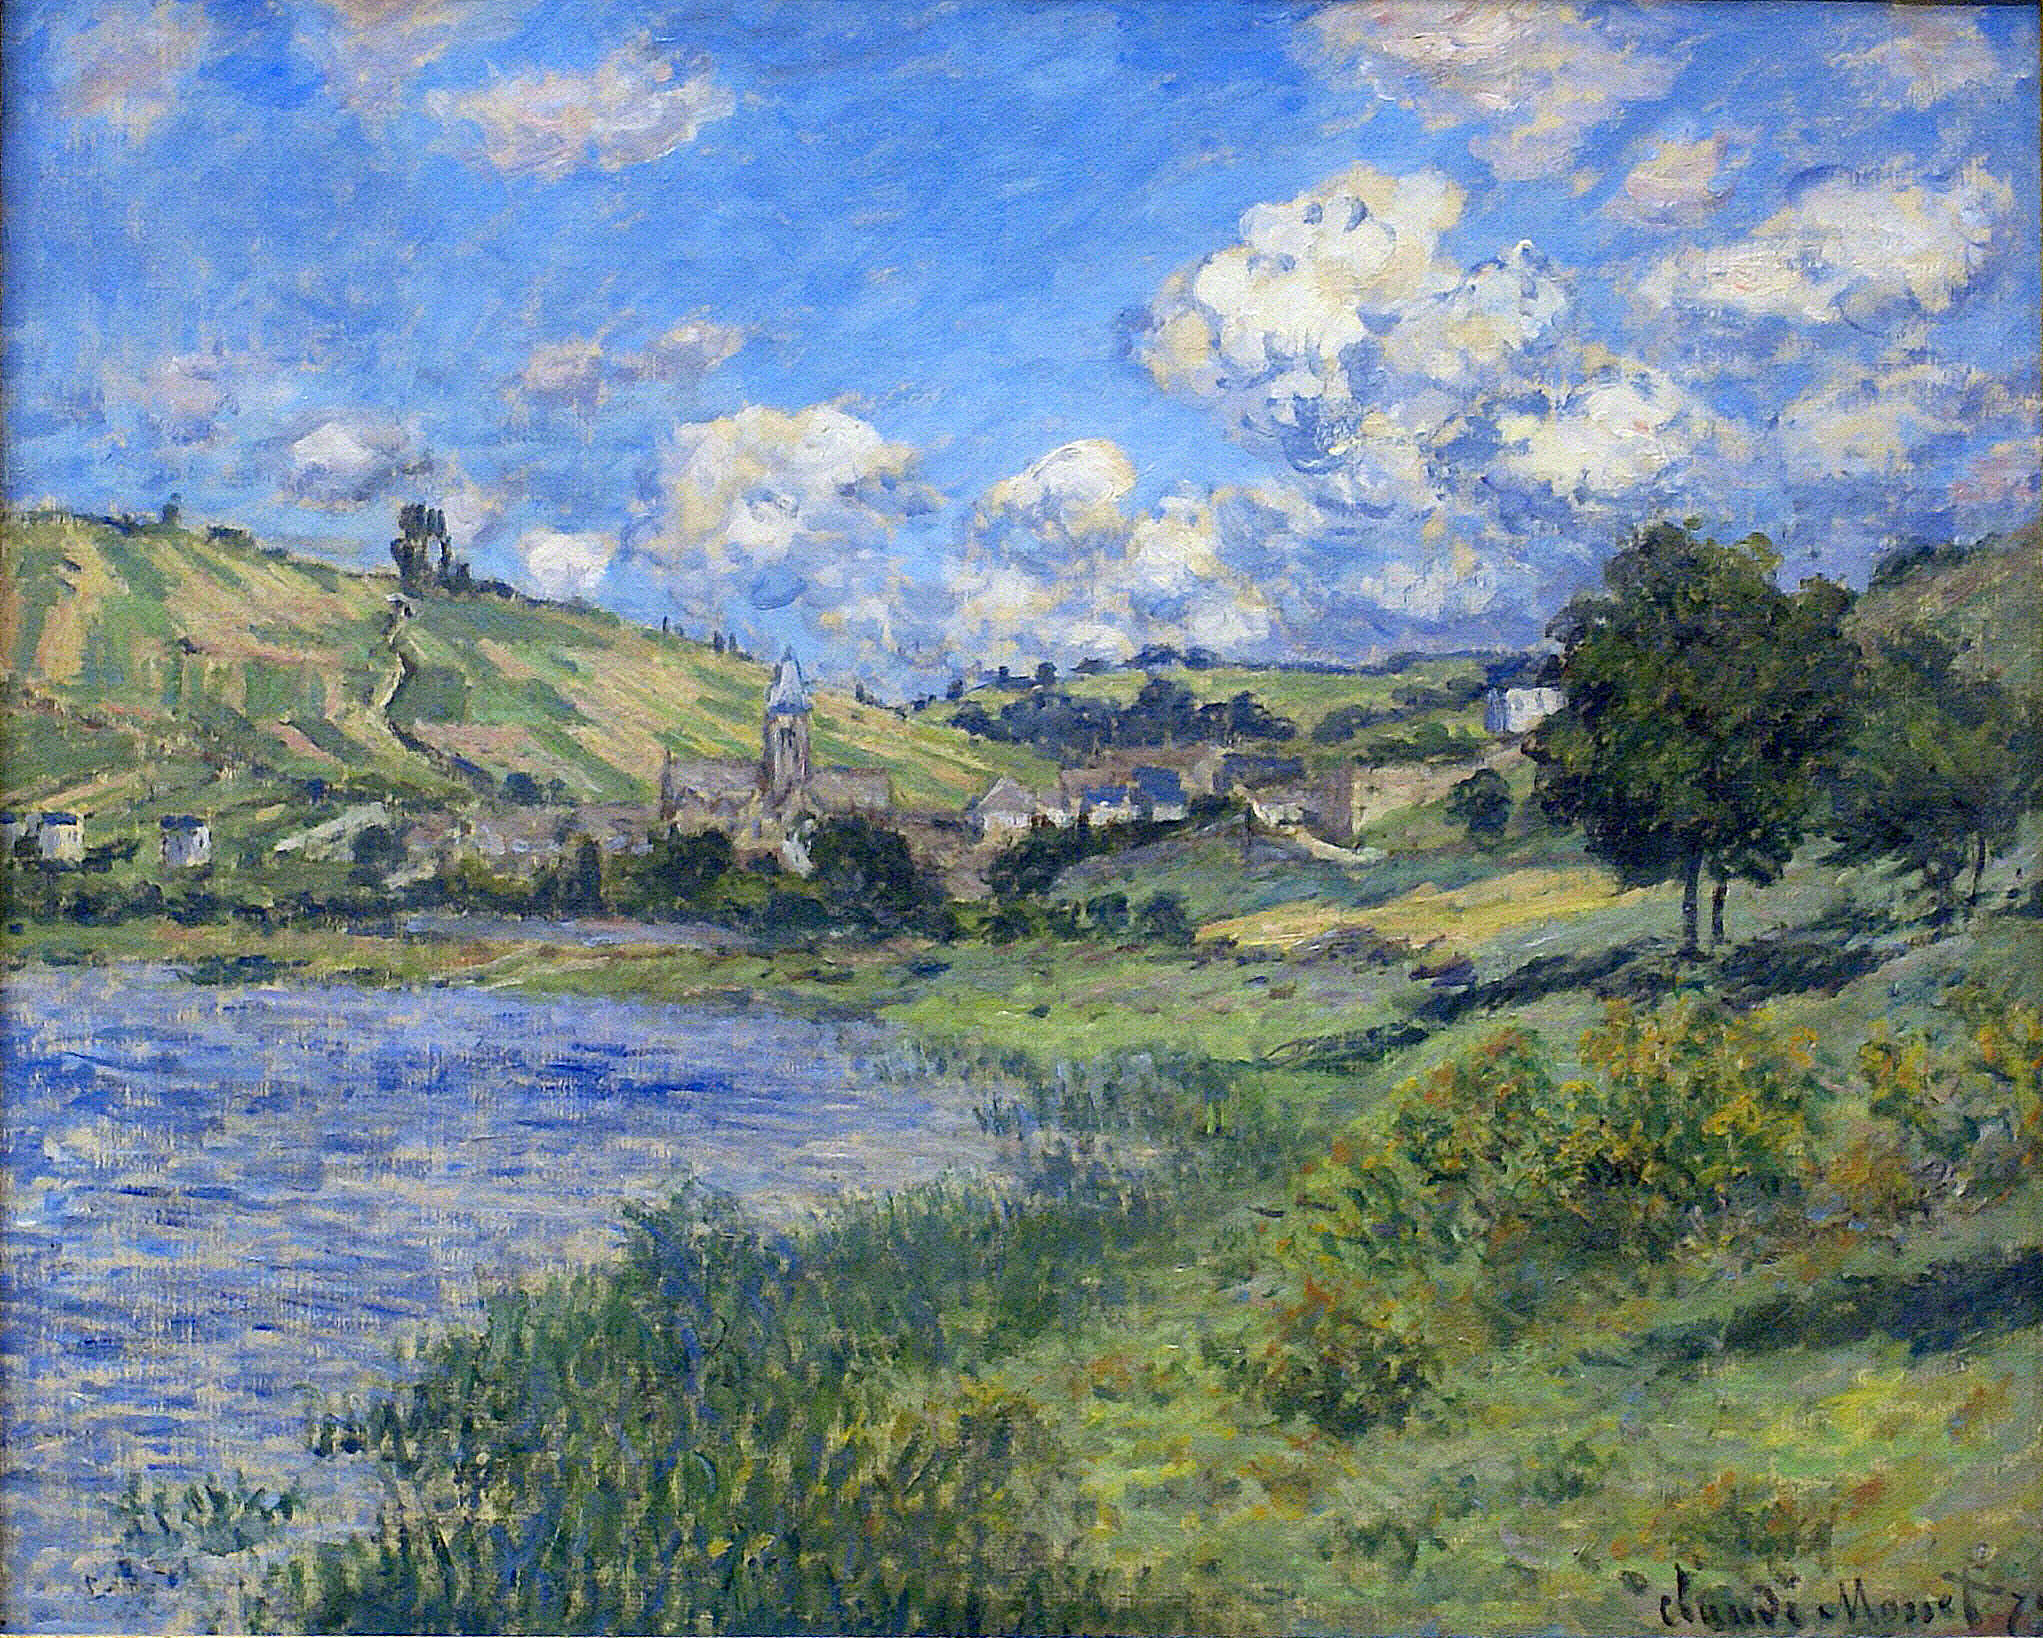 Vetheuil, Paysage by Claude Monet, 1879